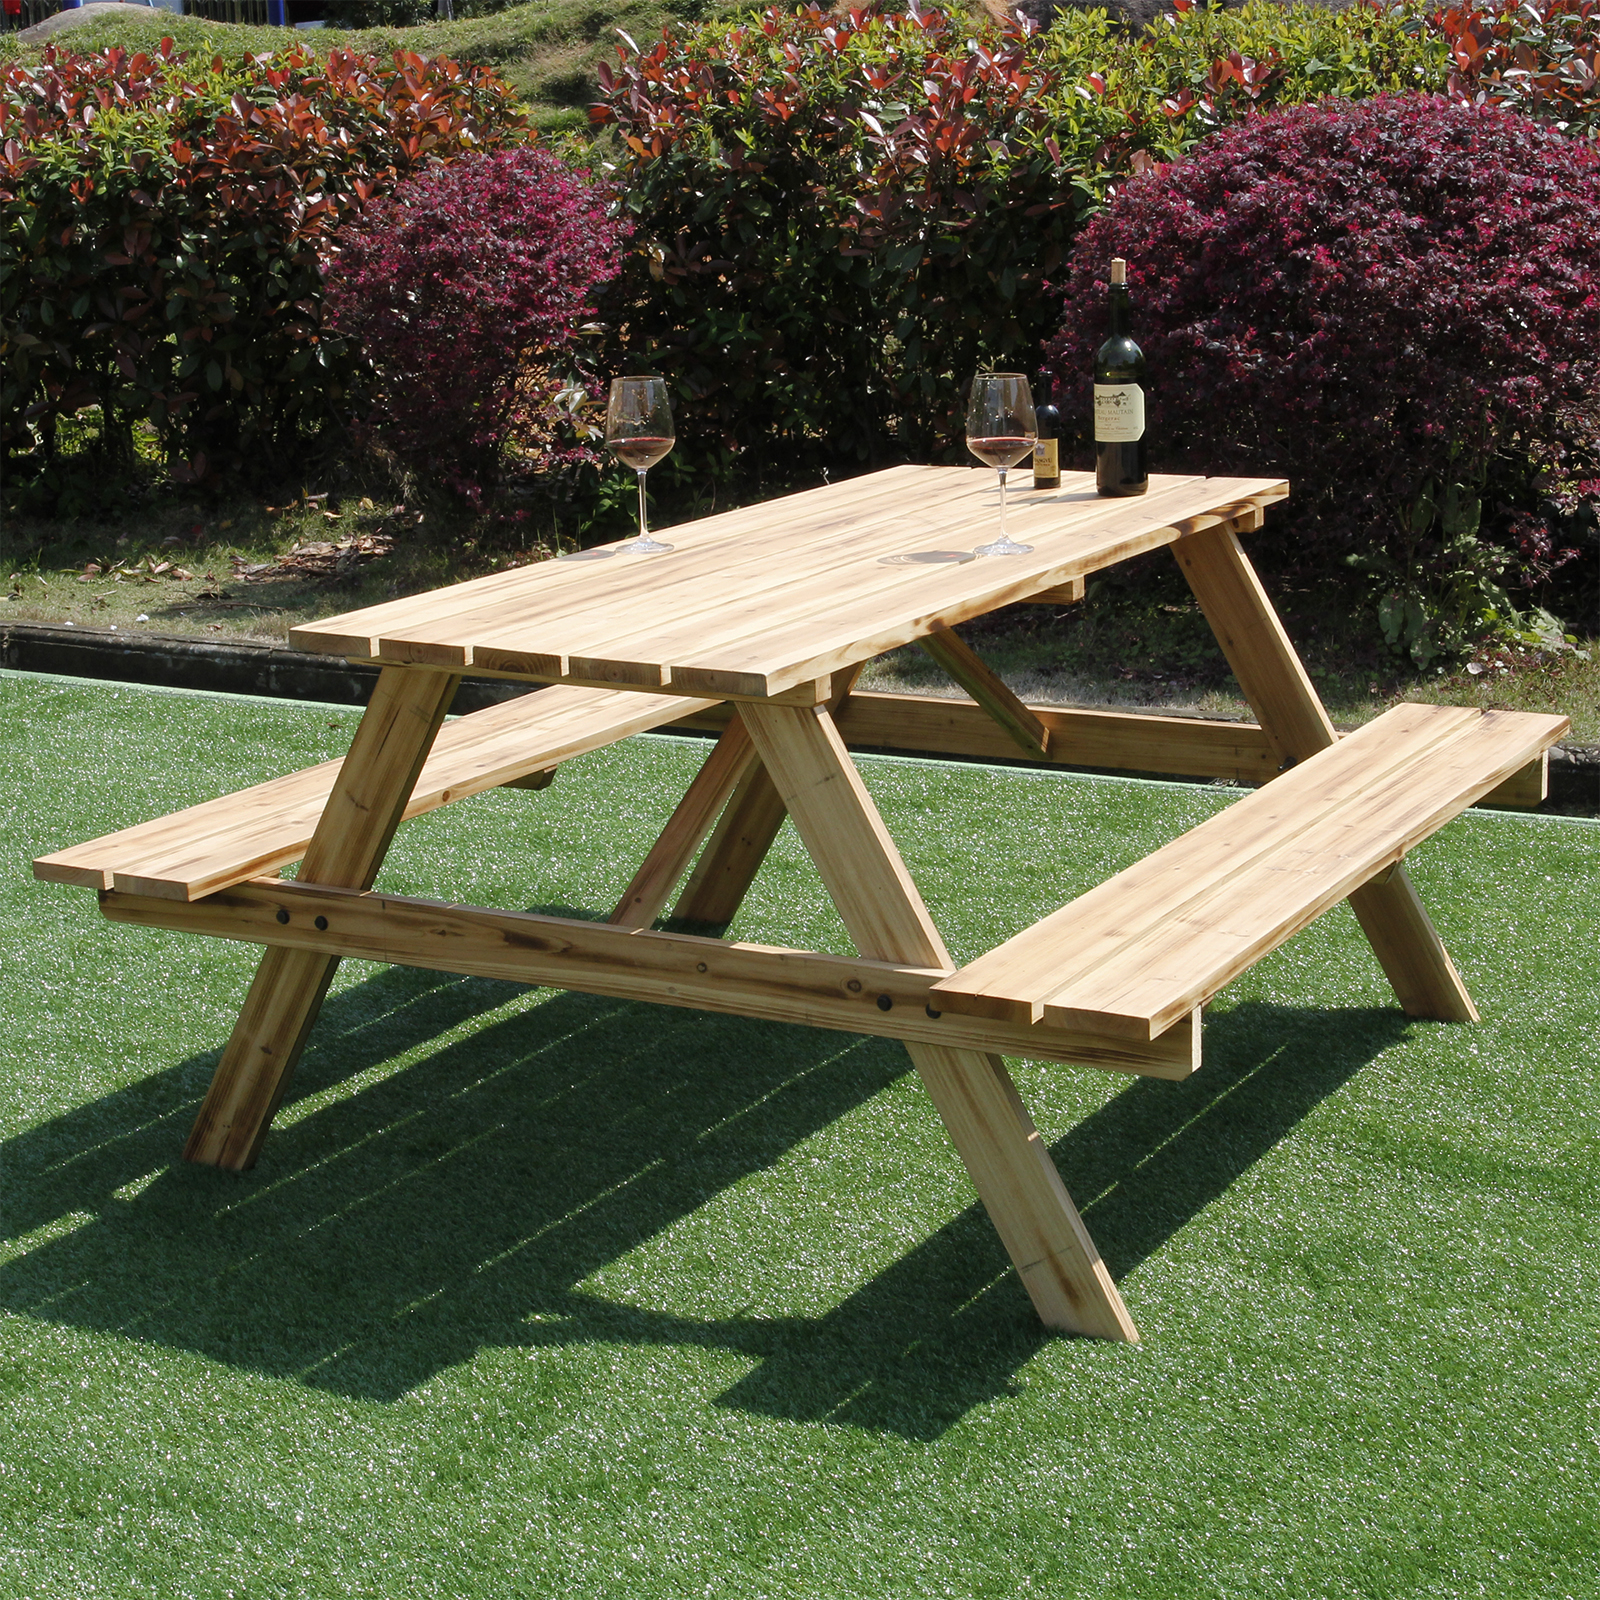 6 SEATER OUTDOOR GARDEN PICNIC BENCH 5FT PUB STYLE SEATING TABLE HEAVY